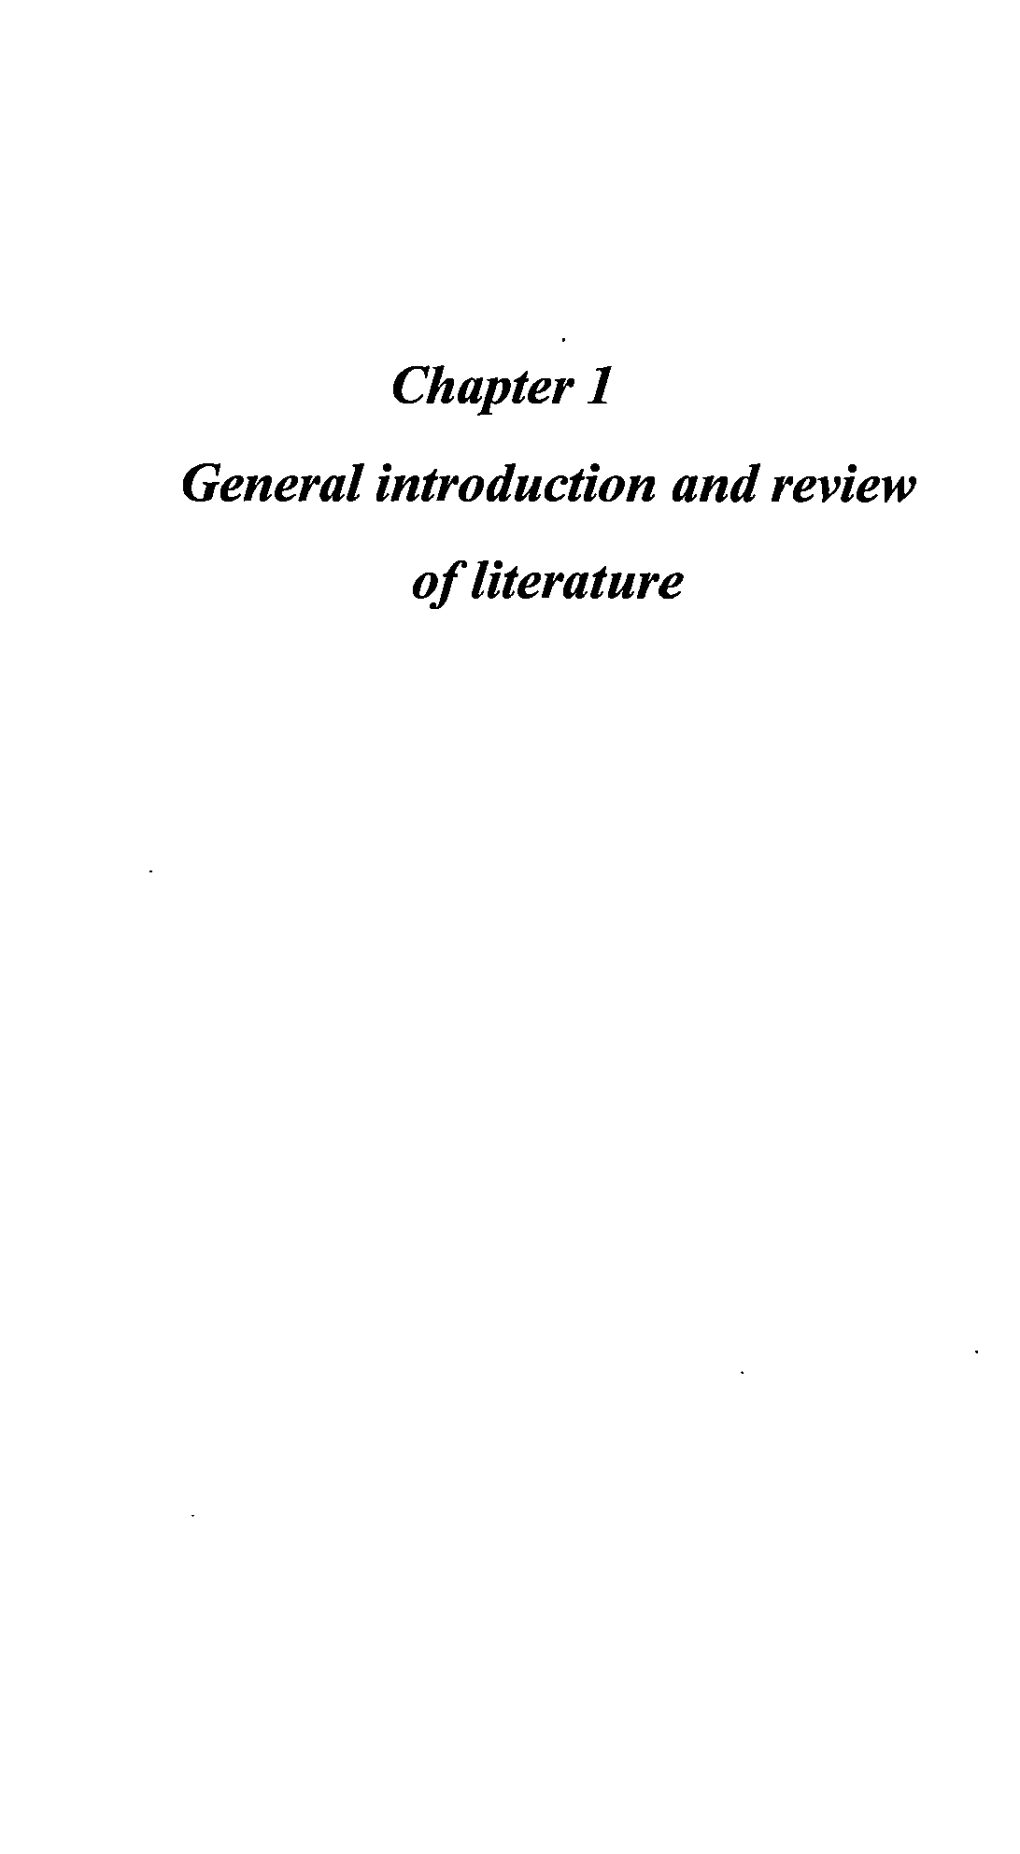 Chapter 1 General Introduction and Review of Literature